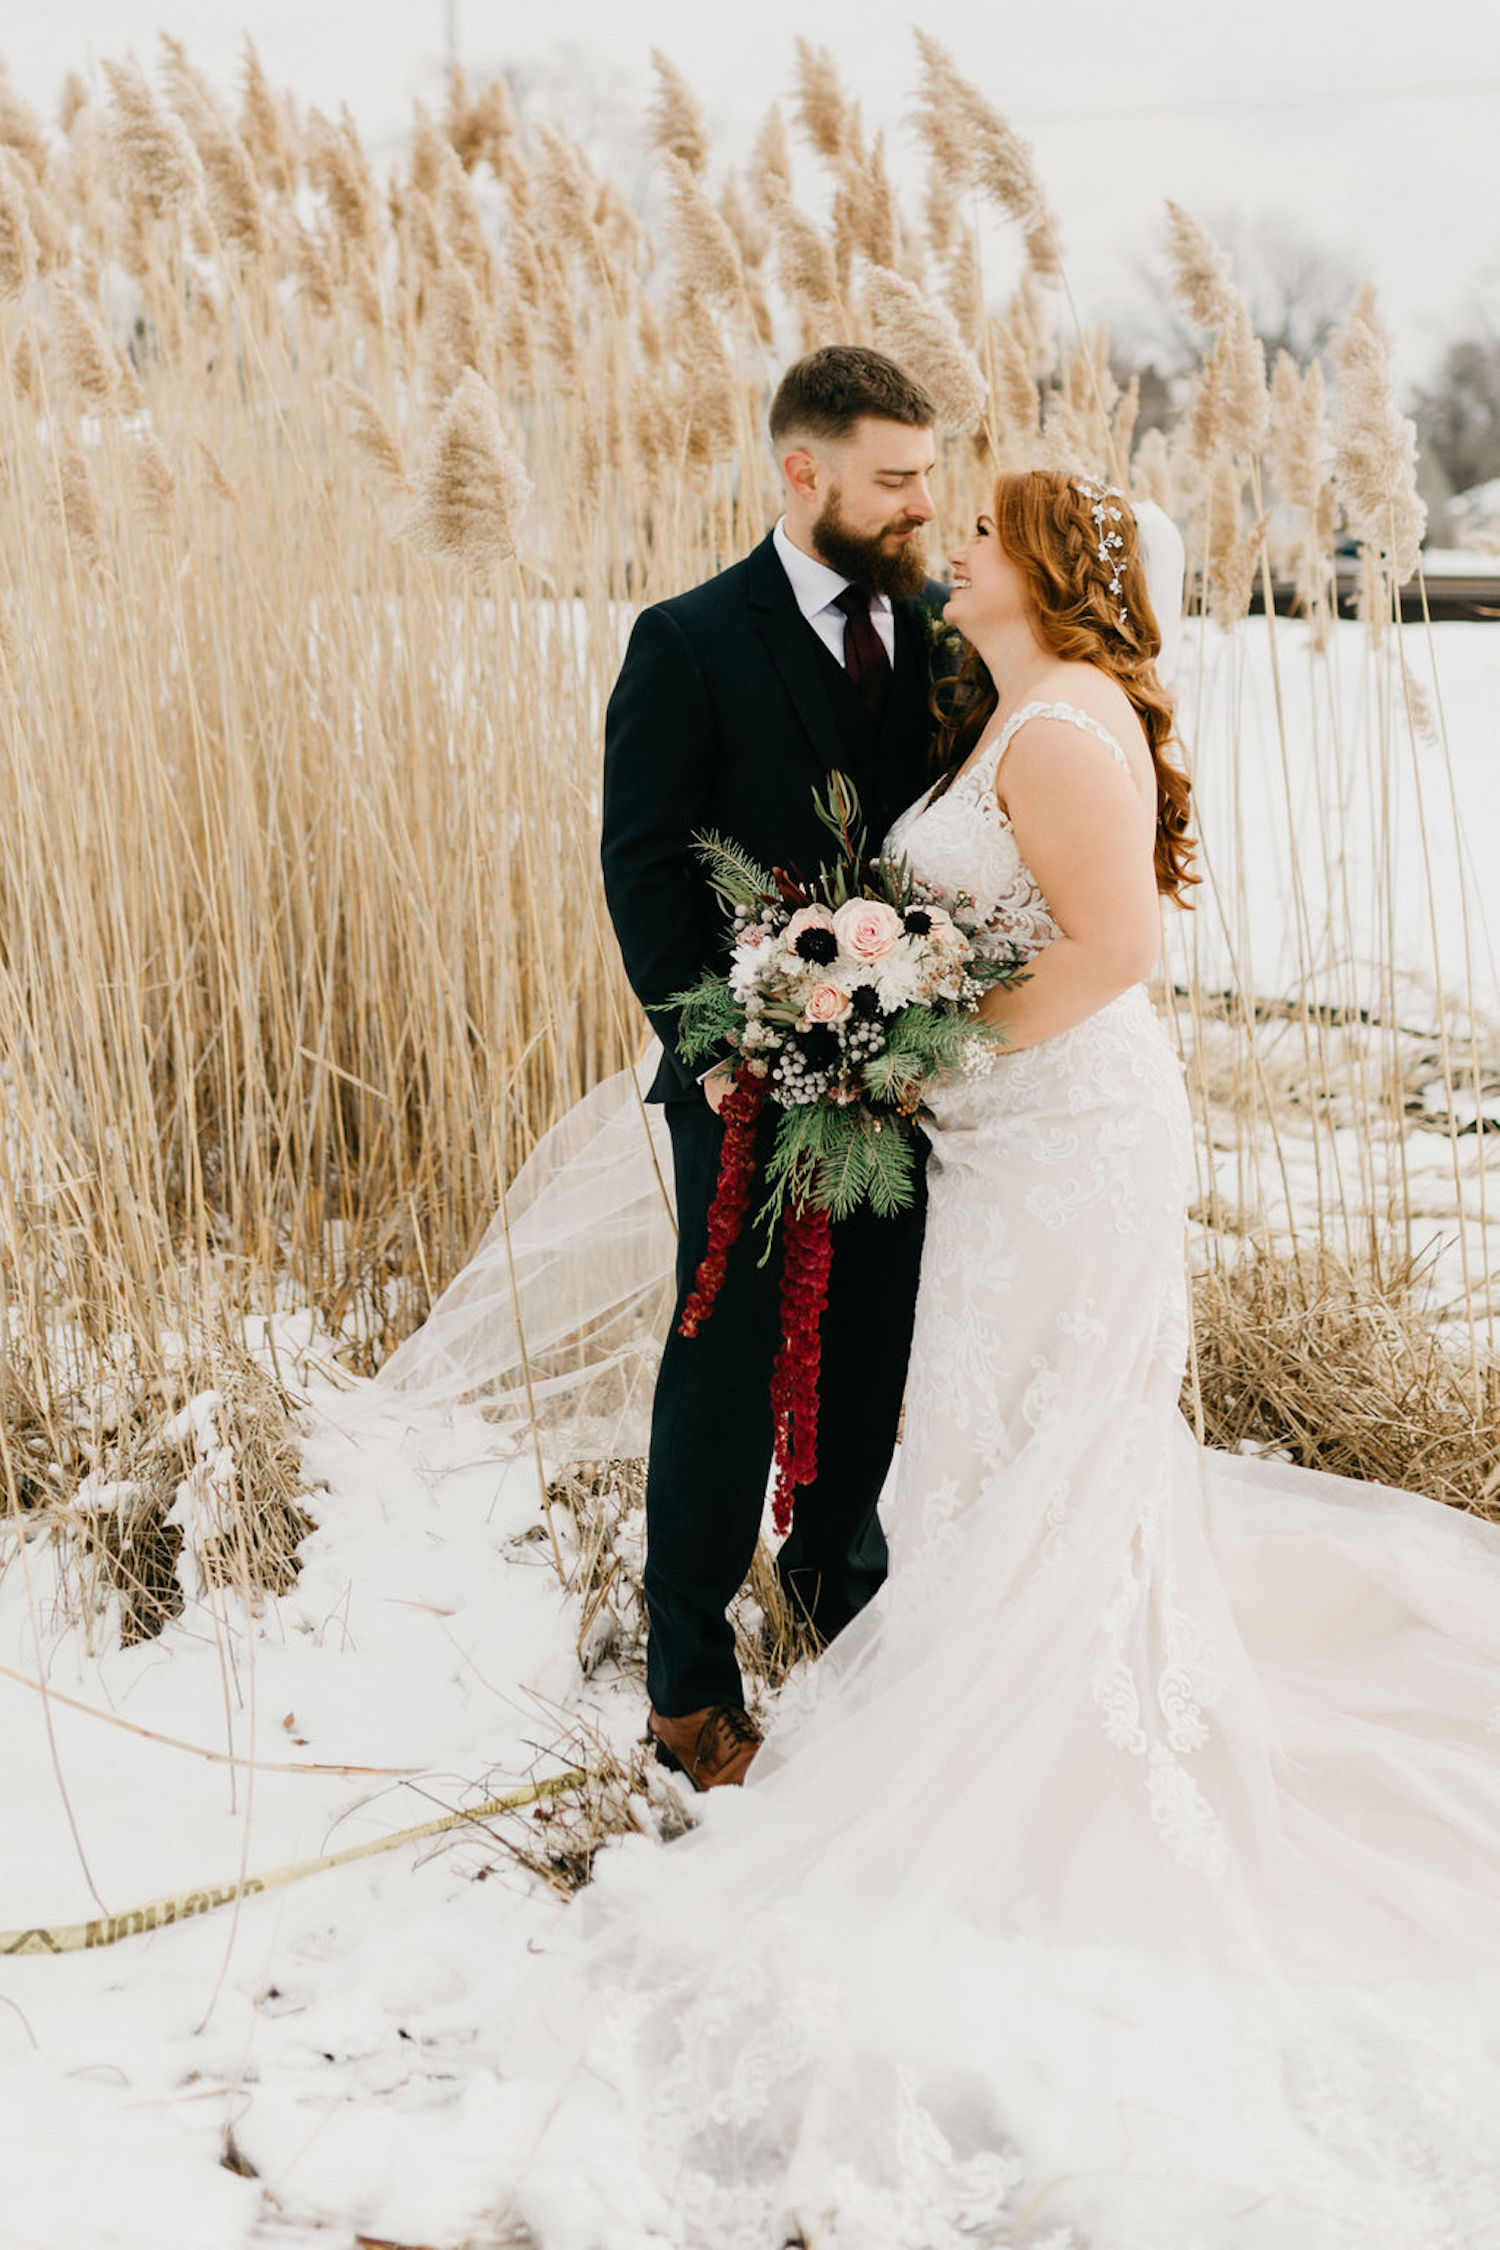 Bride and groom smiling in the snow